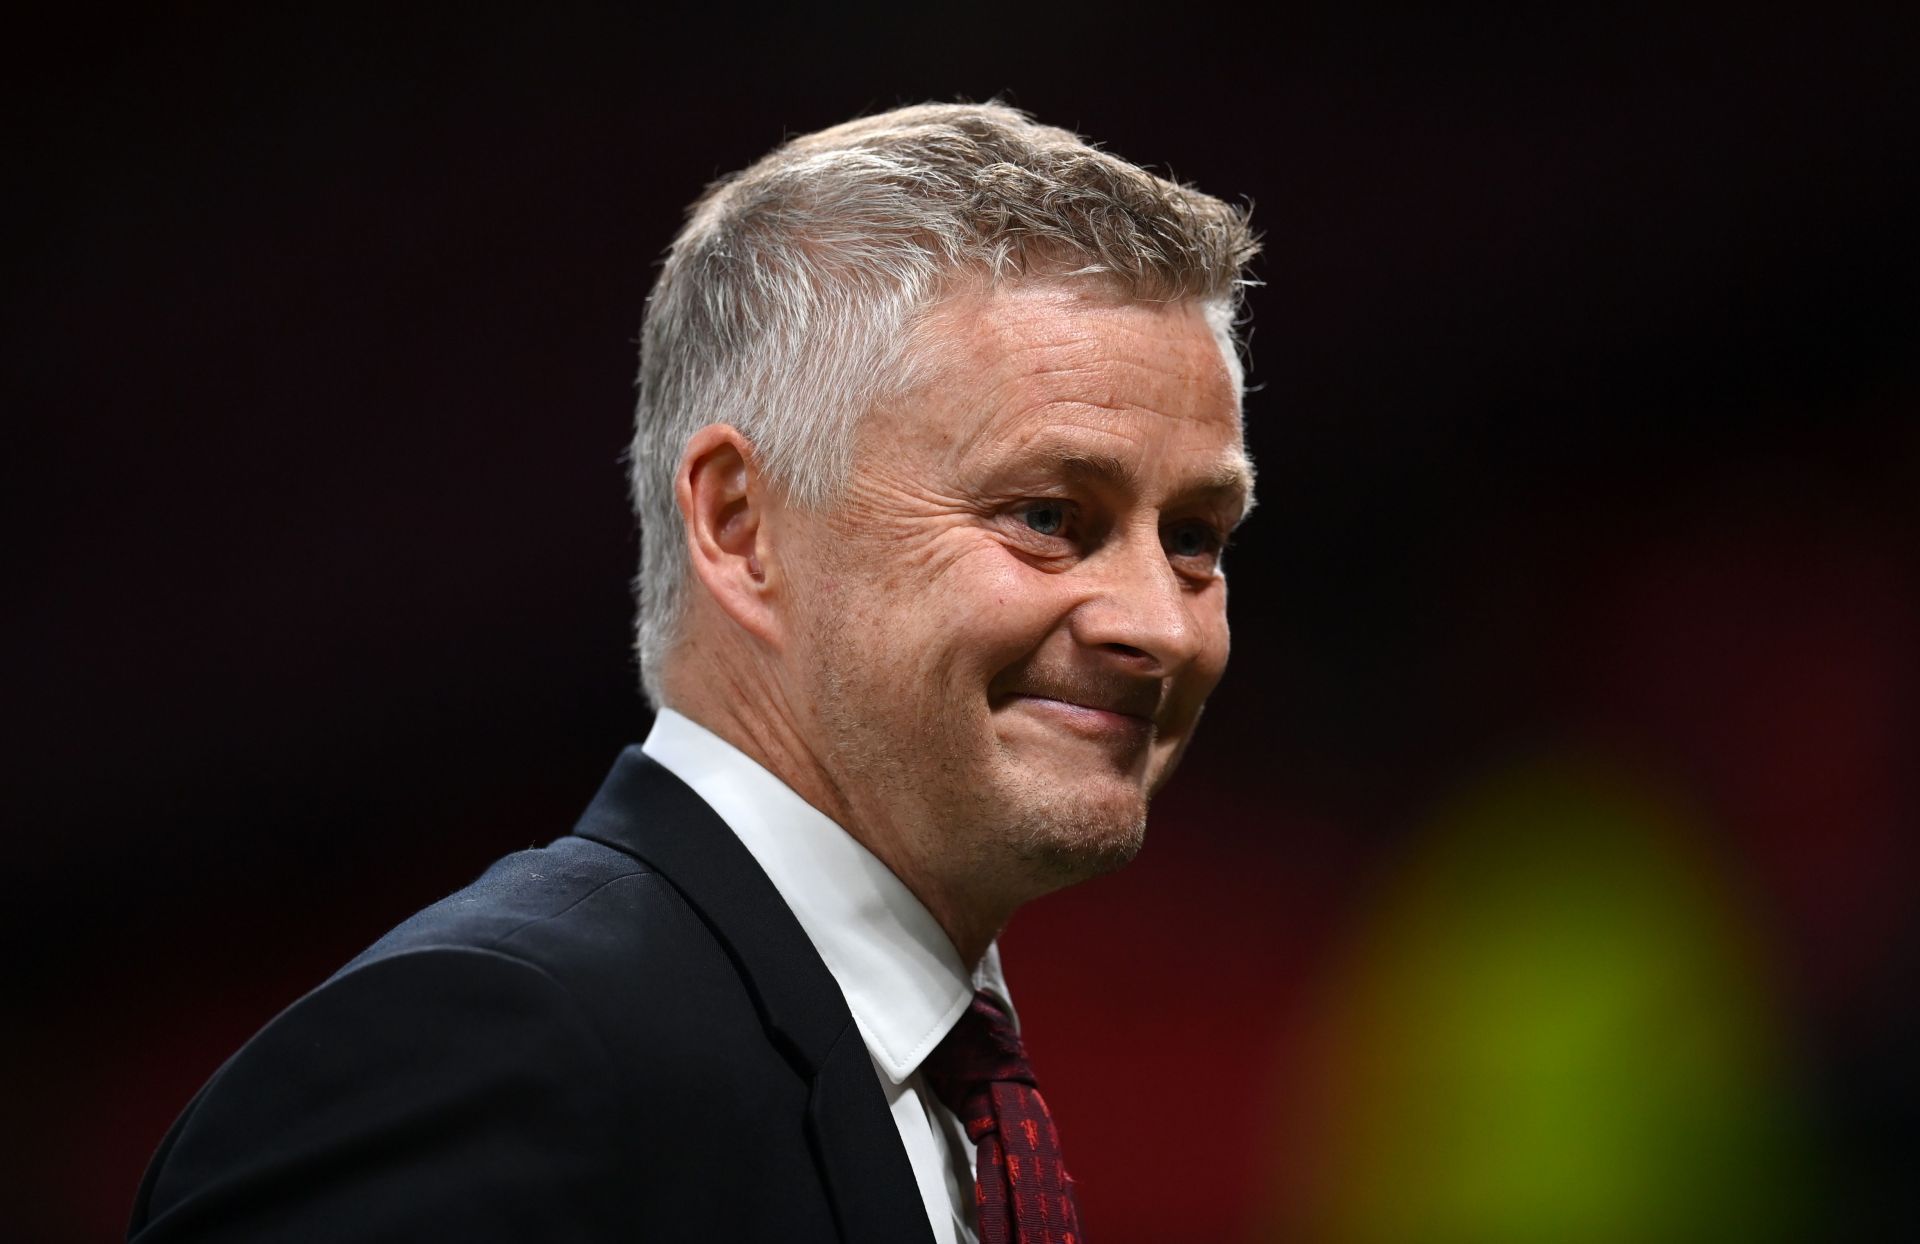 Manchester United manager Ole Gunnar Solskjaer. (Photo by Michael Regan/Getty Images)